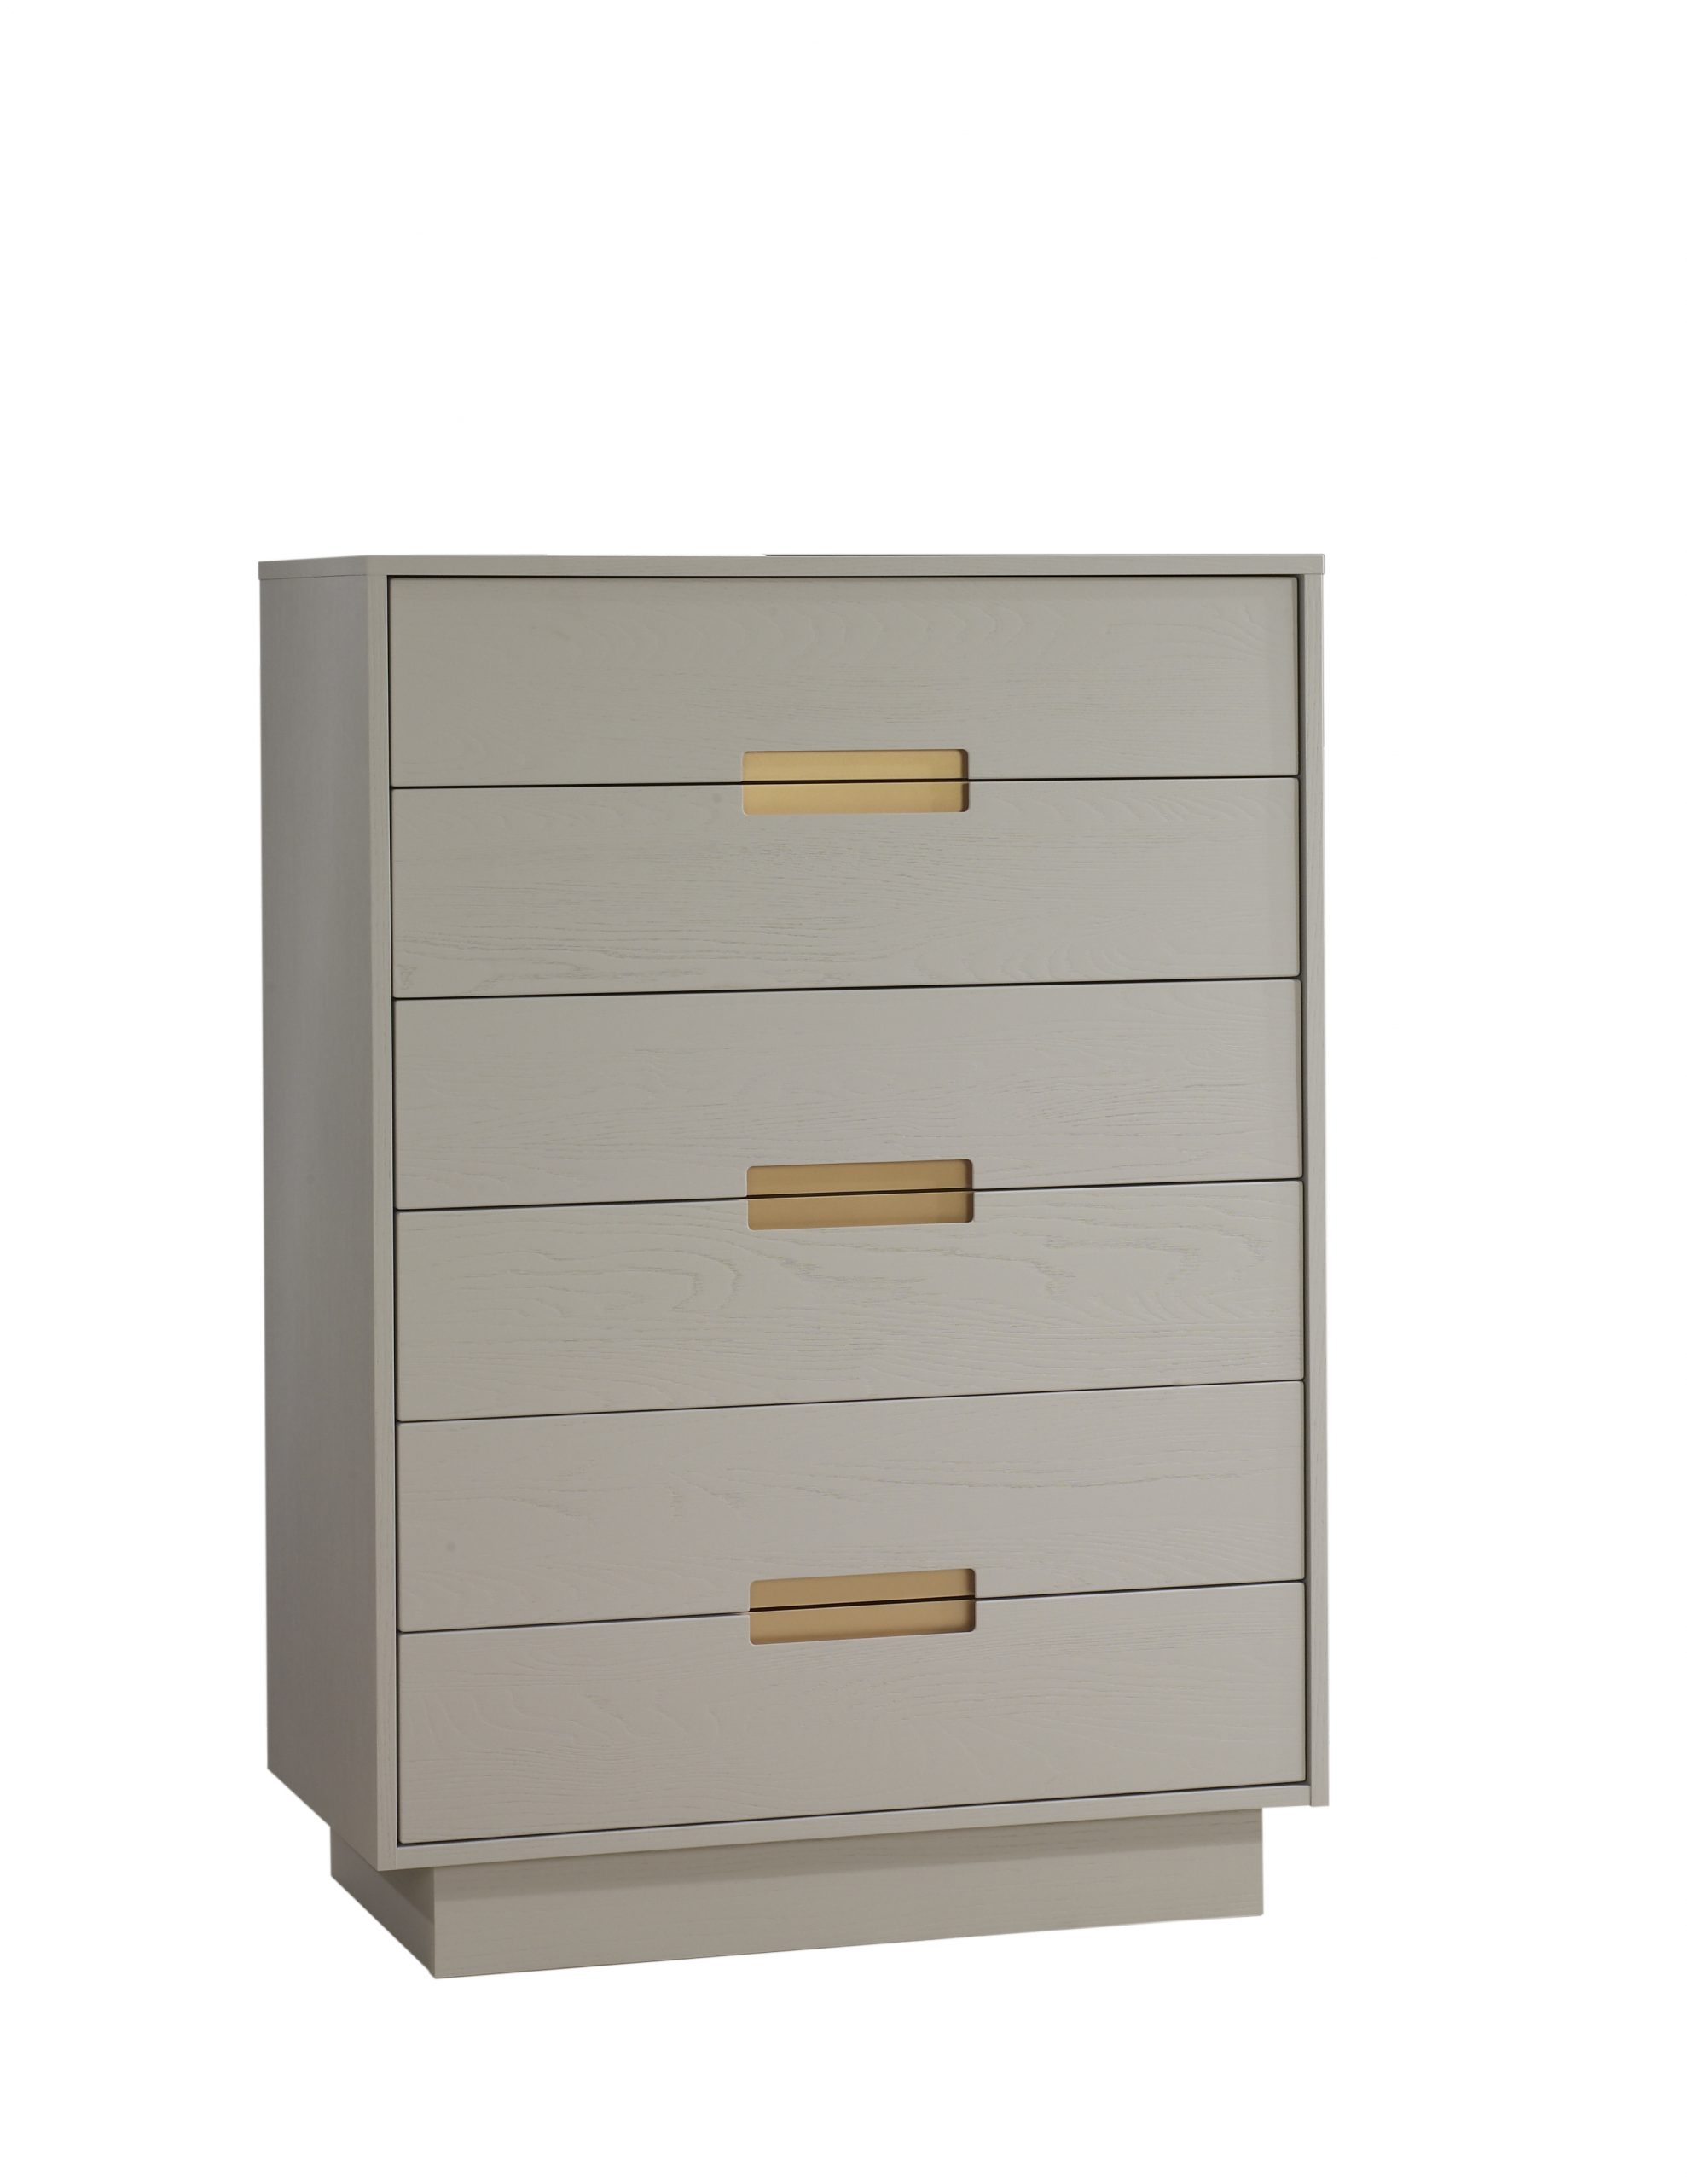 Como 6 Drawer Tall Chest (with 6 drawers instead of only 5) in Dove